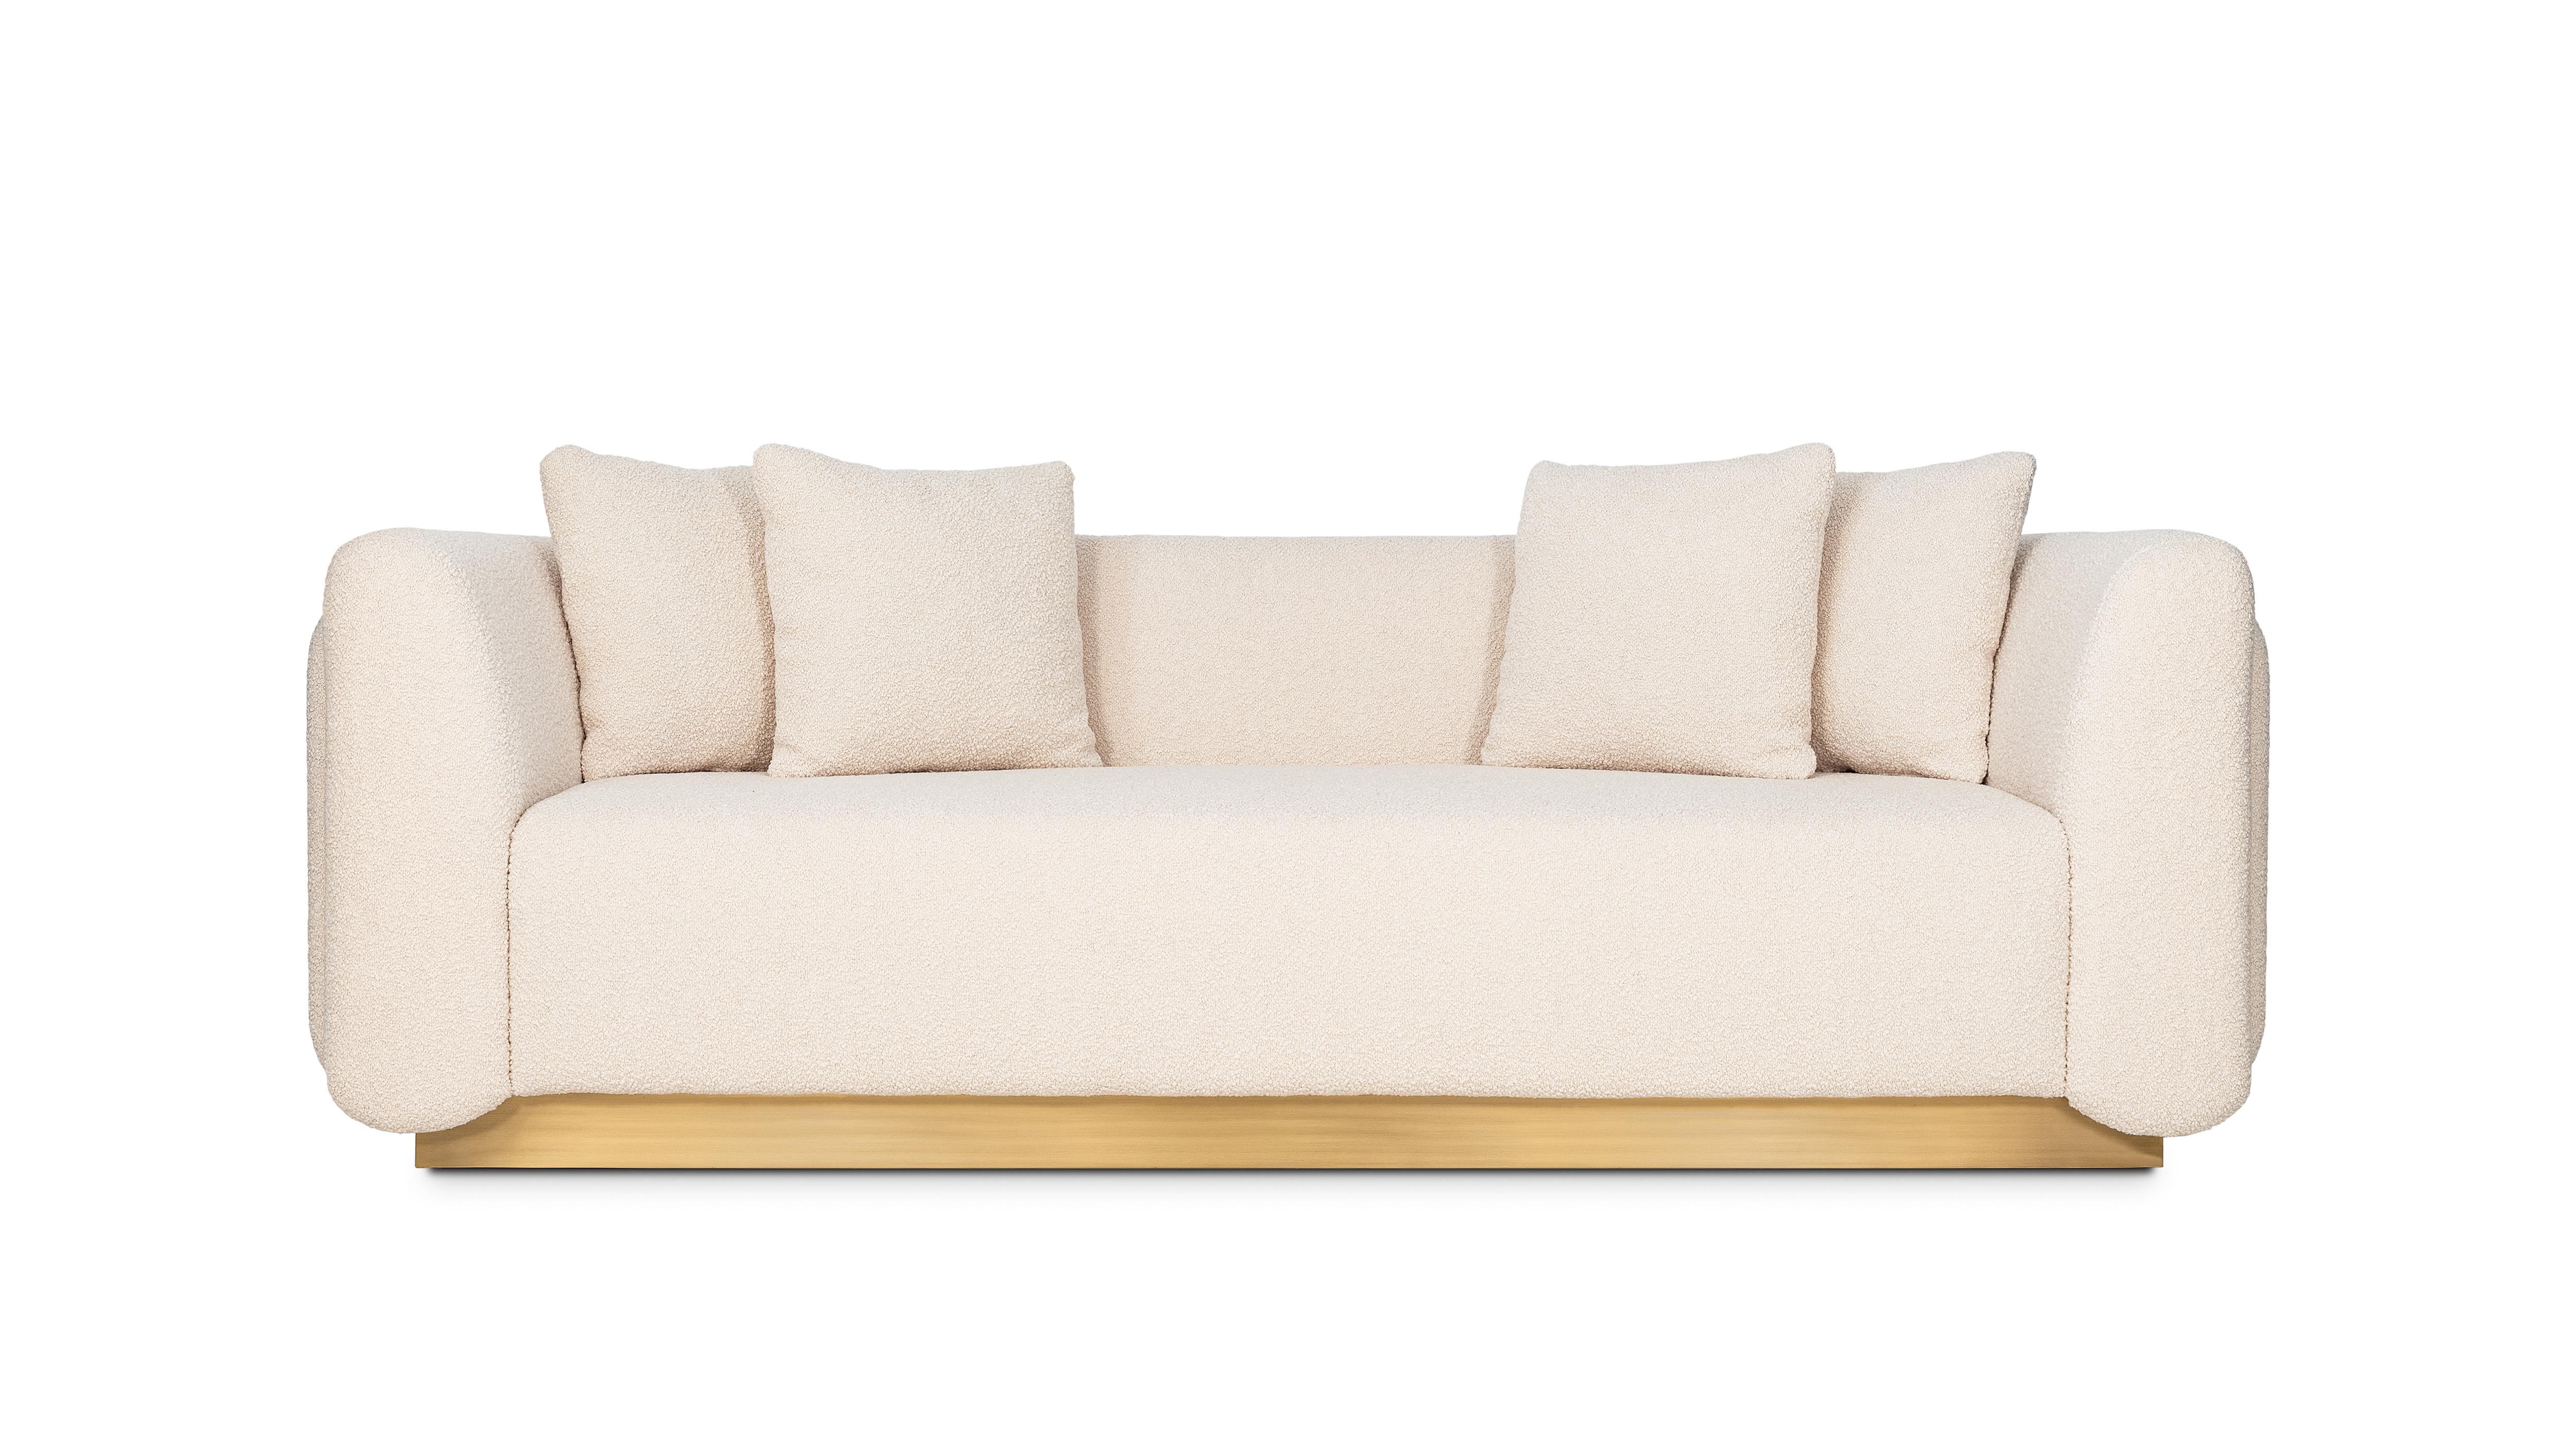 Foz 3 Seat Sofa by InsidherLand
Dimensions: D 96 x W 230 x H 87 cm.
Materials: Oxidized brushed brass, InsidherLand Woollen Ref. 6 fabric.
75 kg.
Available in different fabrics.
Five cushions are included.

Fozis a grand sofa that gatherssurprising